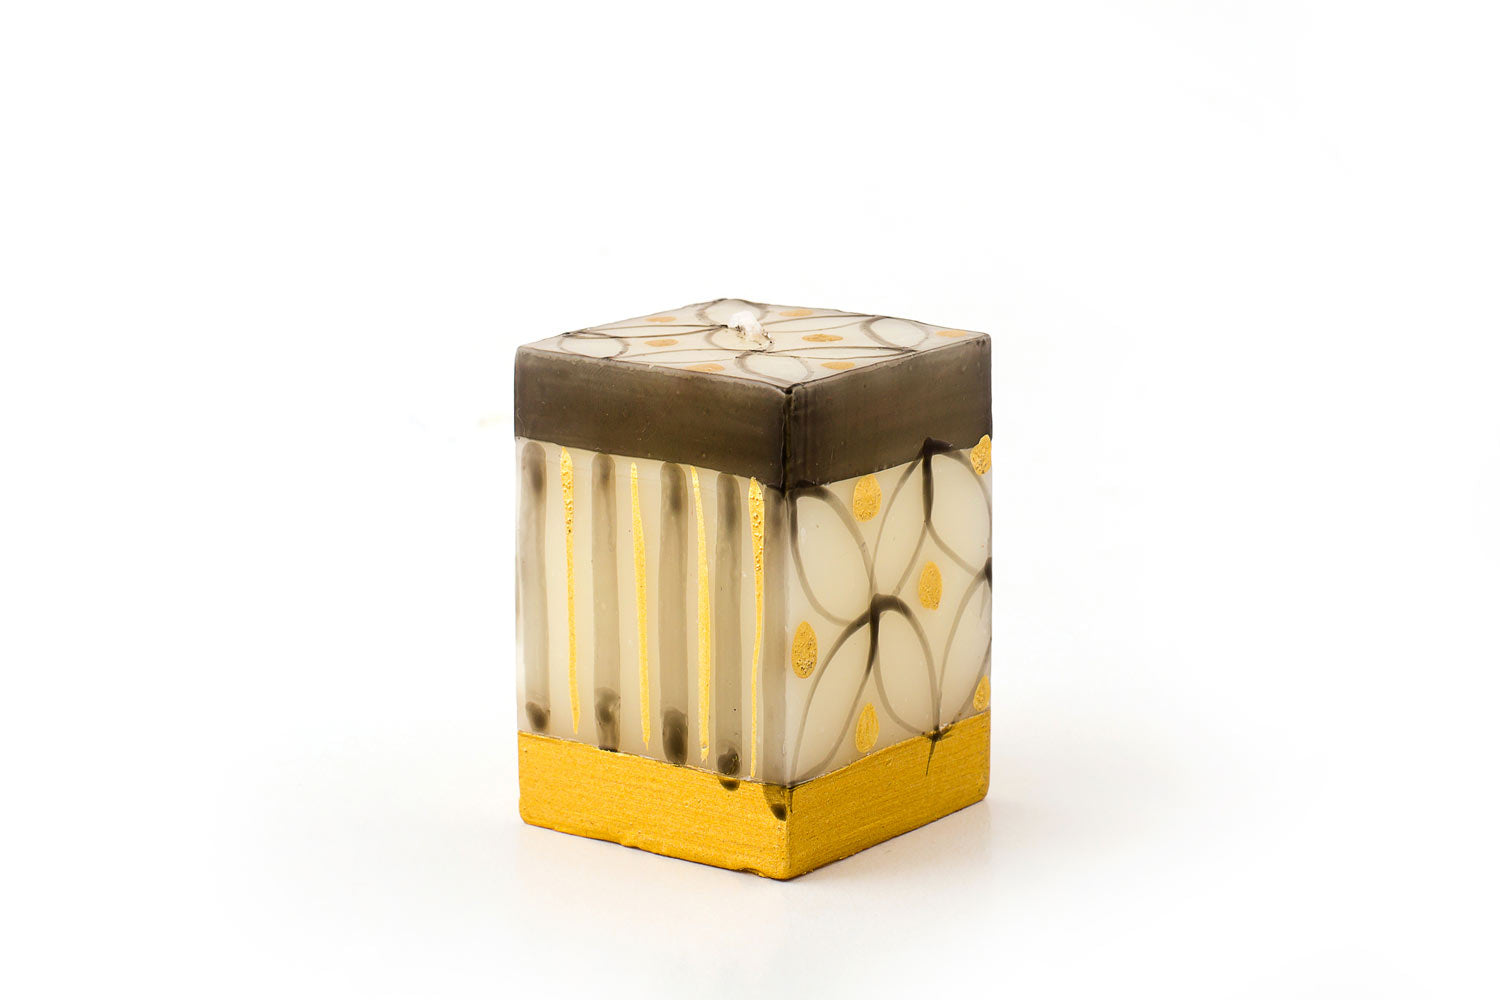 Celebration 2"x2"x3" cube candle.  White background with hand painted grey/black and gold design of stripes and flora.